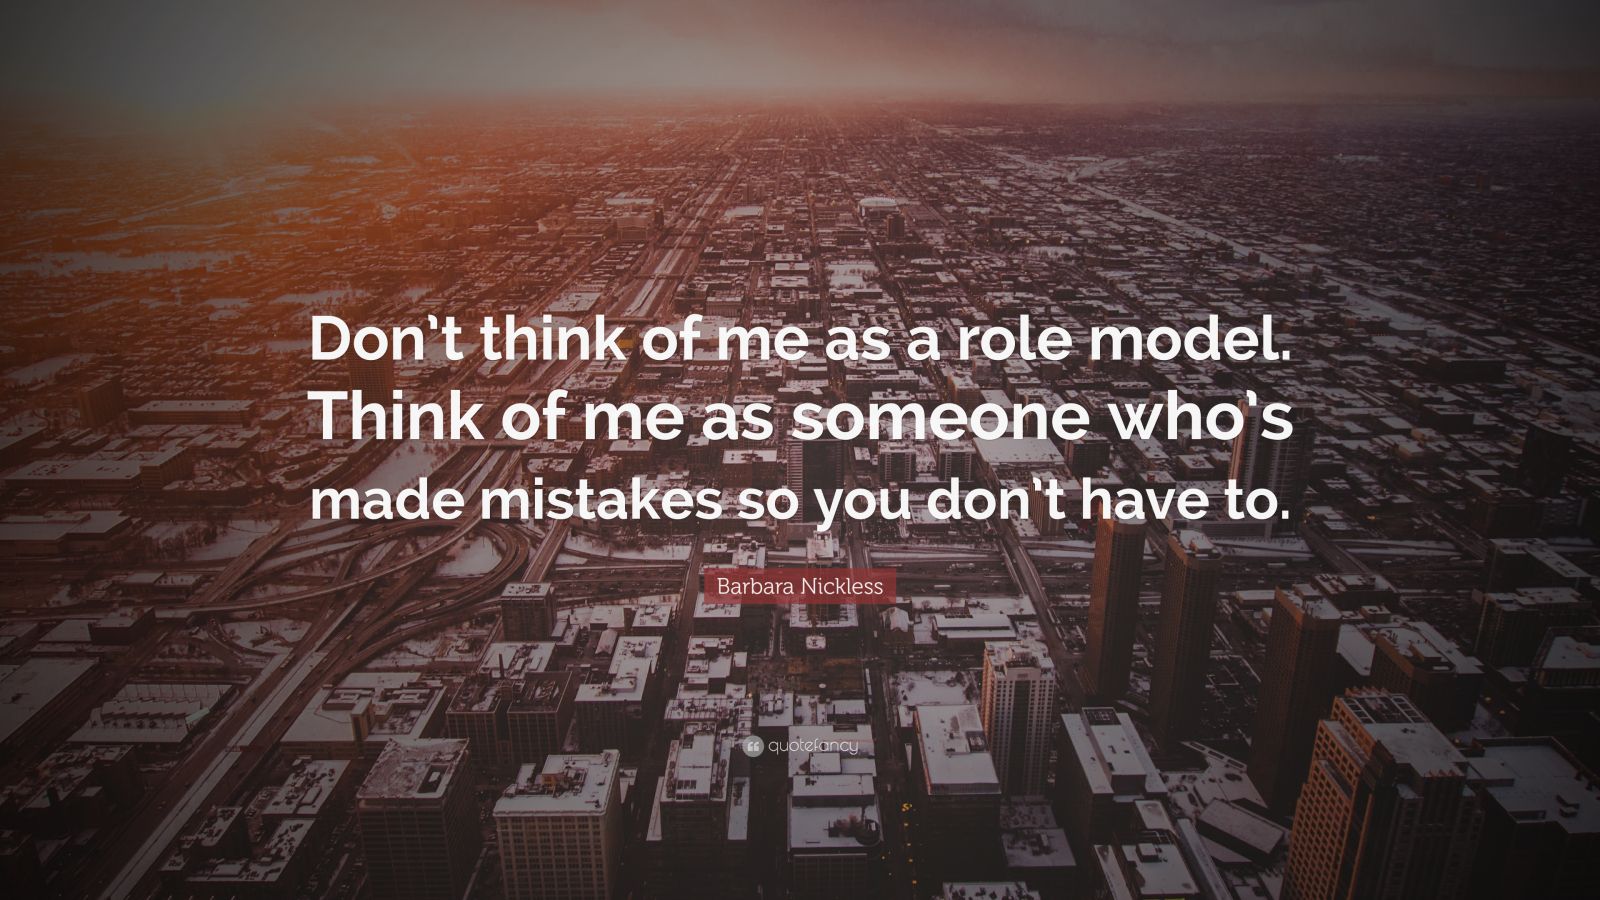 Barbara Nickless Quote: “Don’t think of me as a role model. Think of me ...